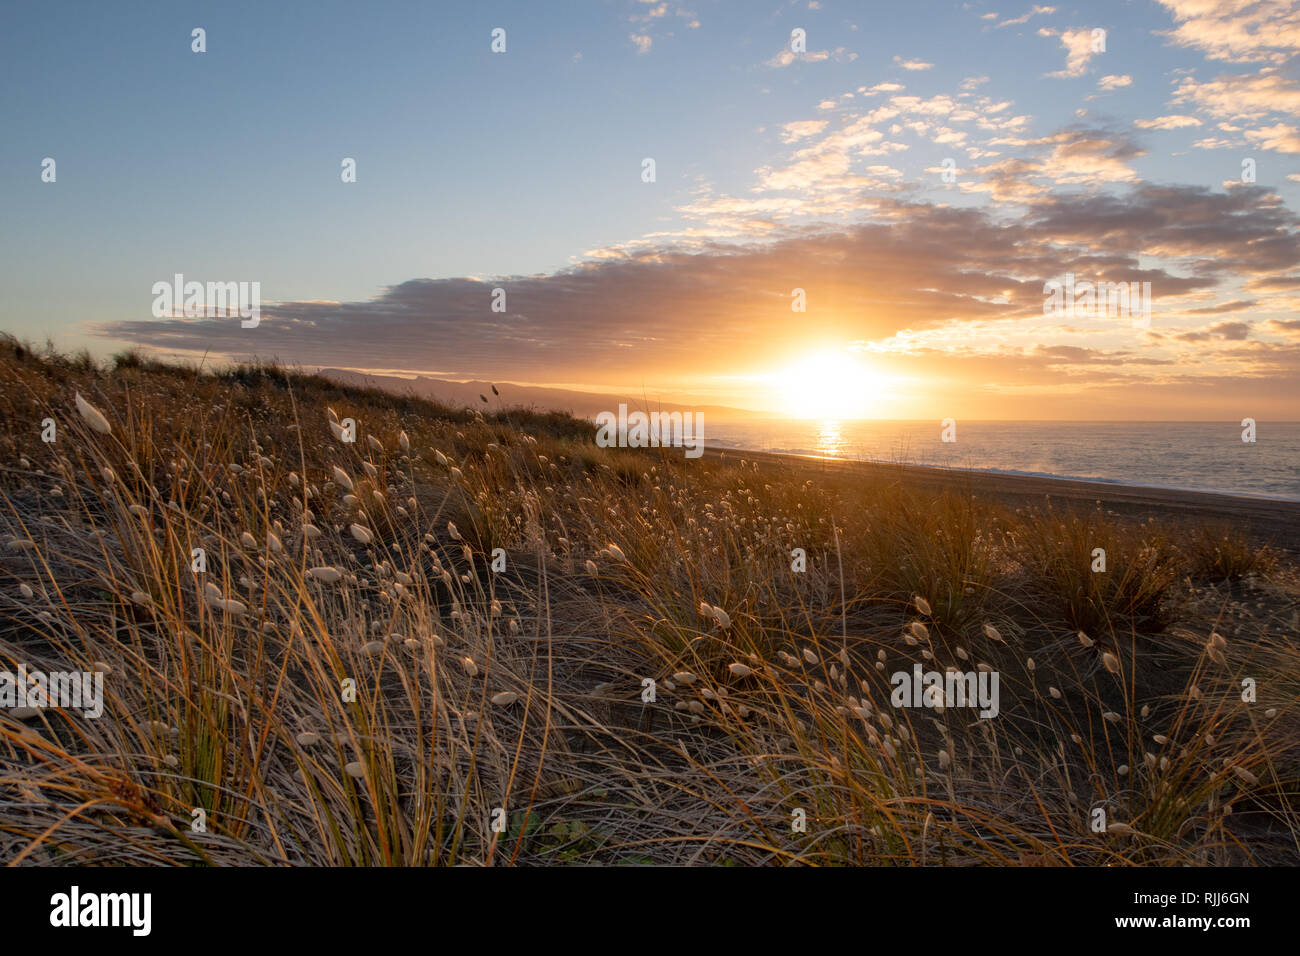 The sun rises over the ocean and Kaitorete Spit warming up the landscape in Canterbury, New Zealand Stock Photo